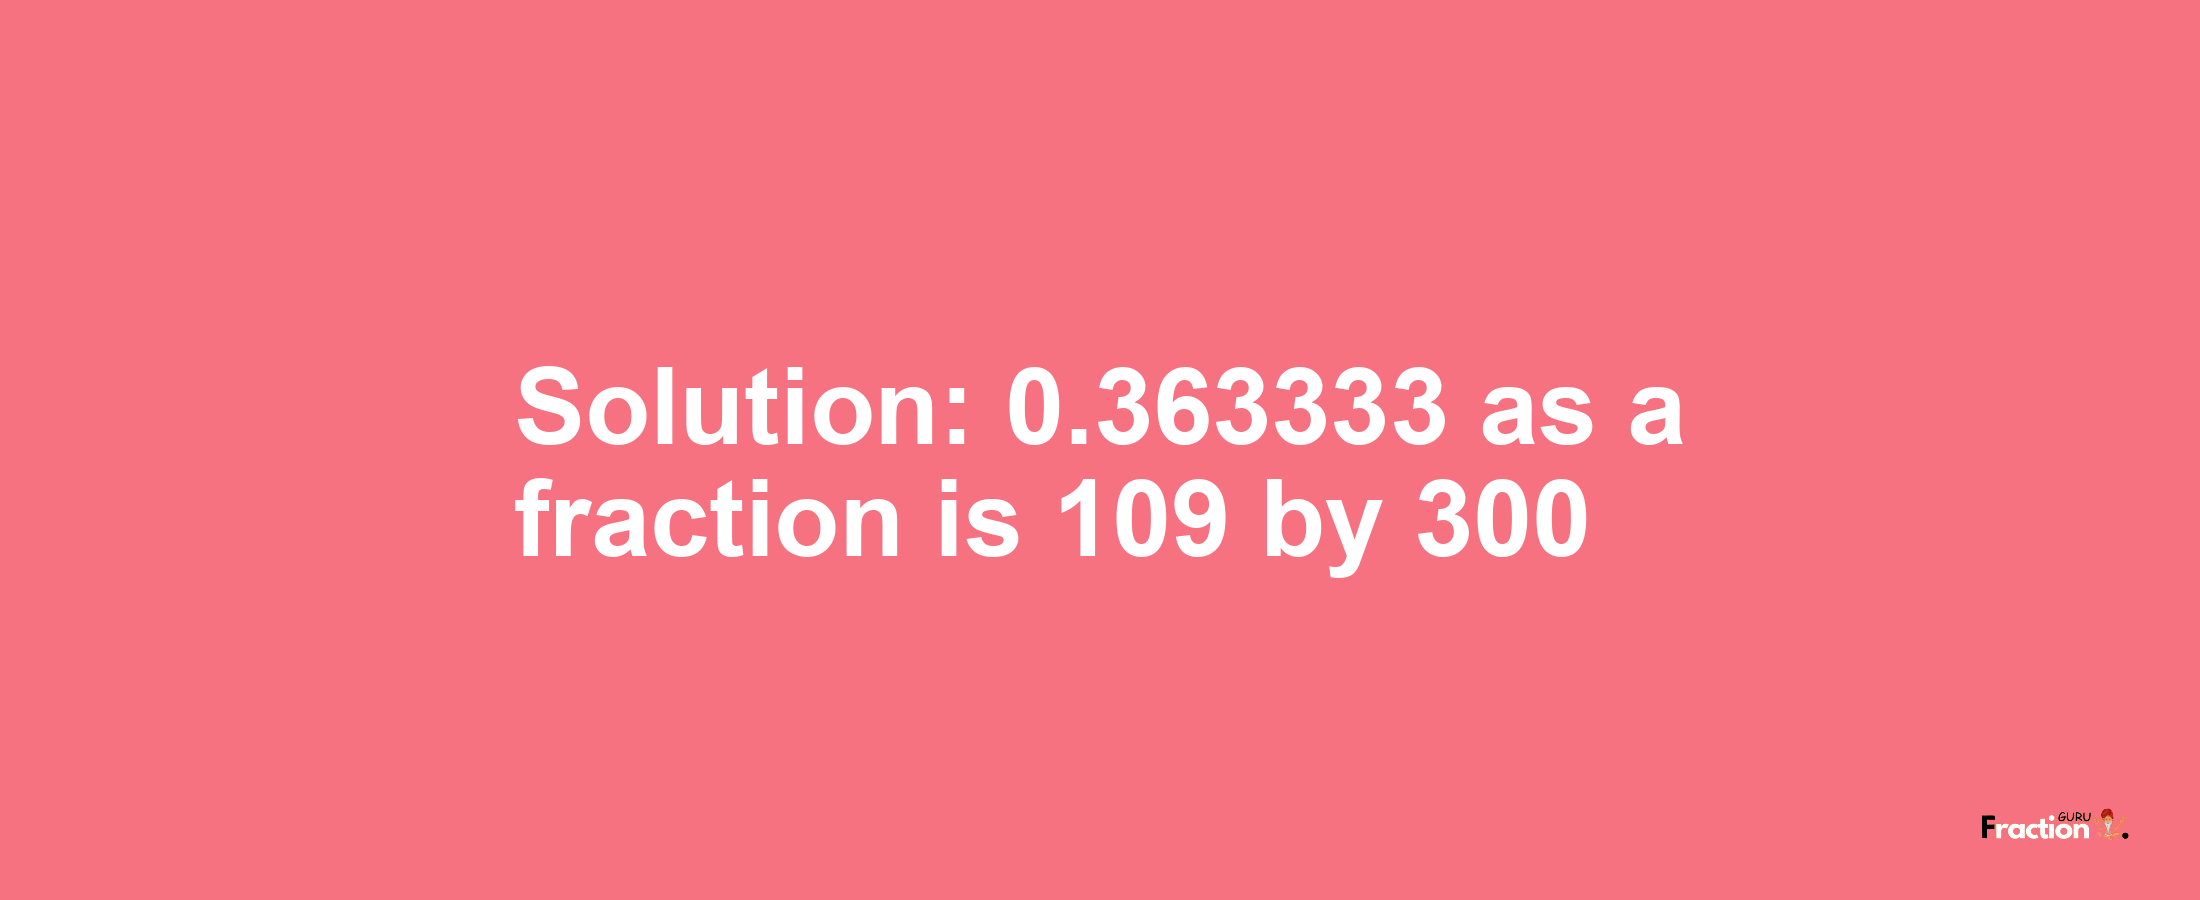 Solution:0.363333 as a fraction is 109/300